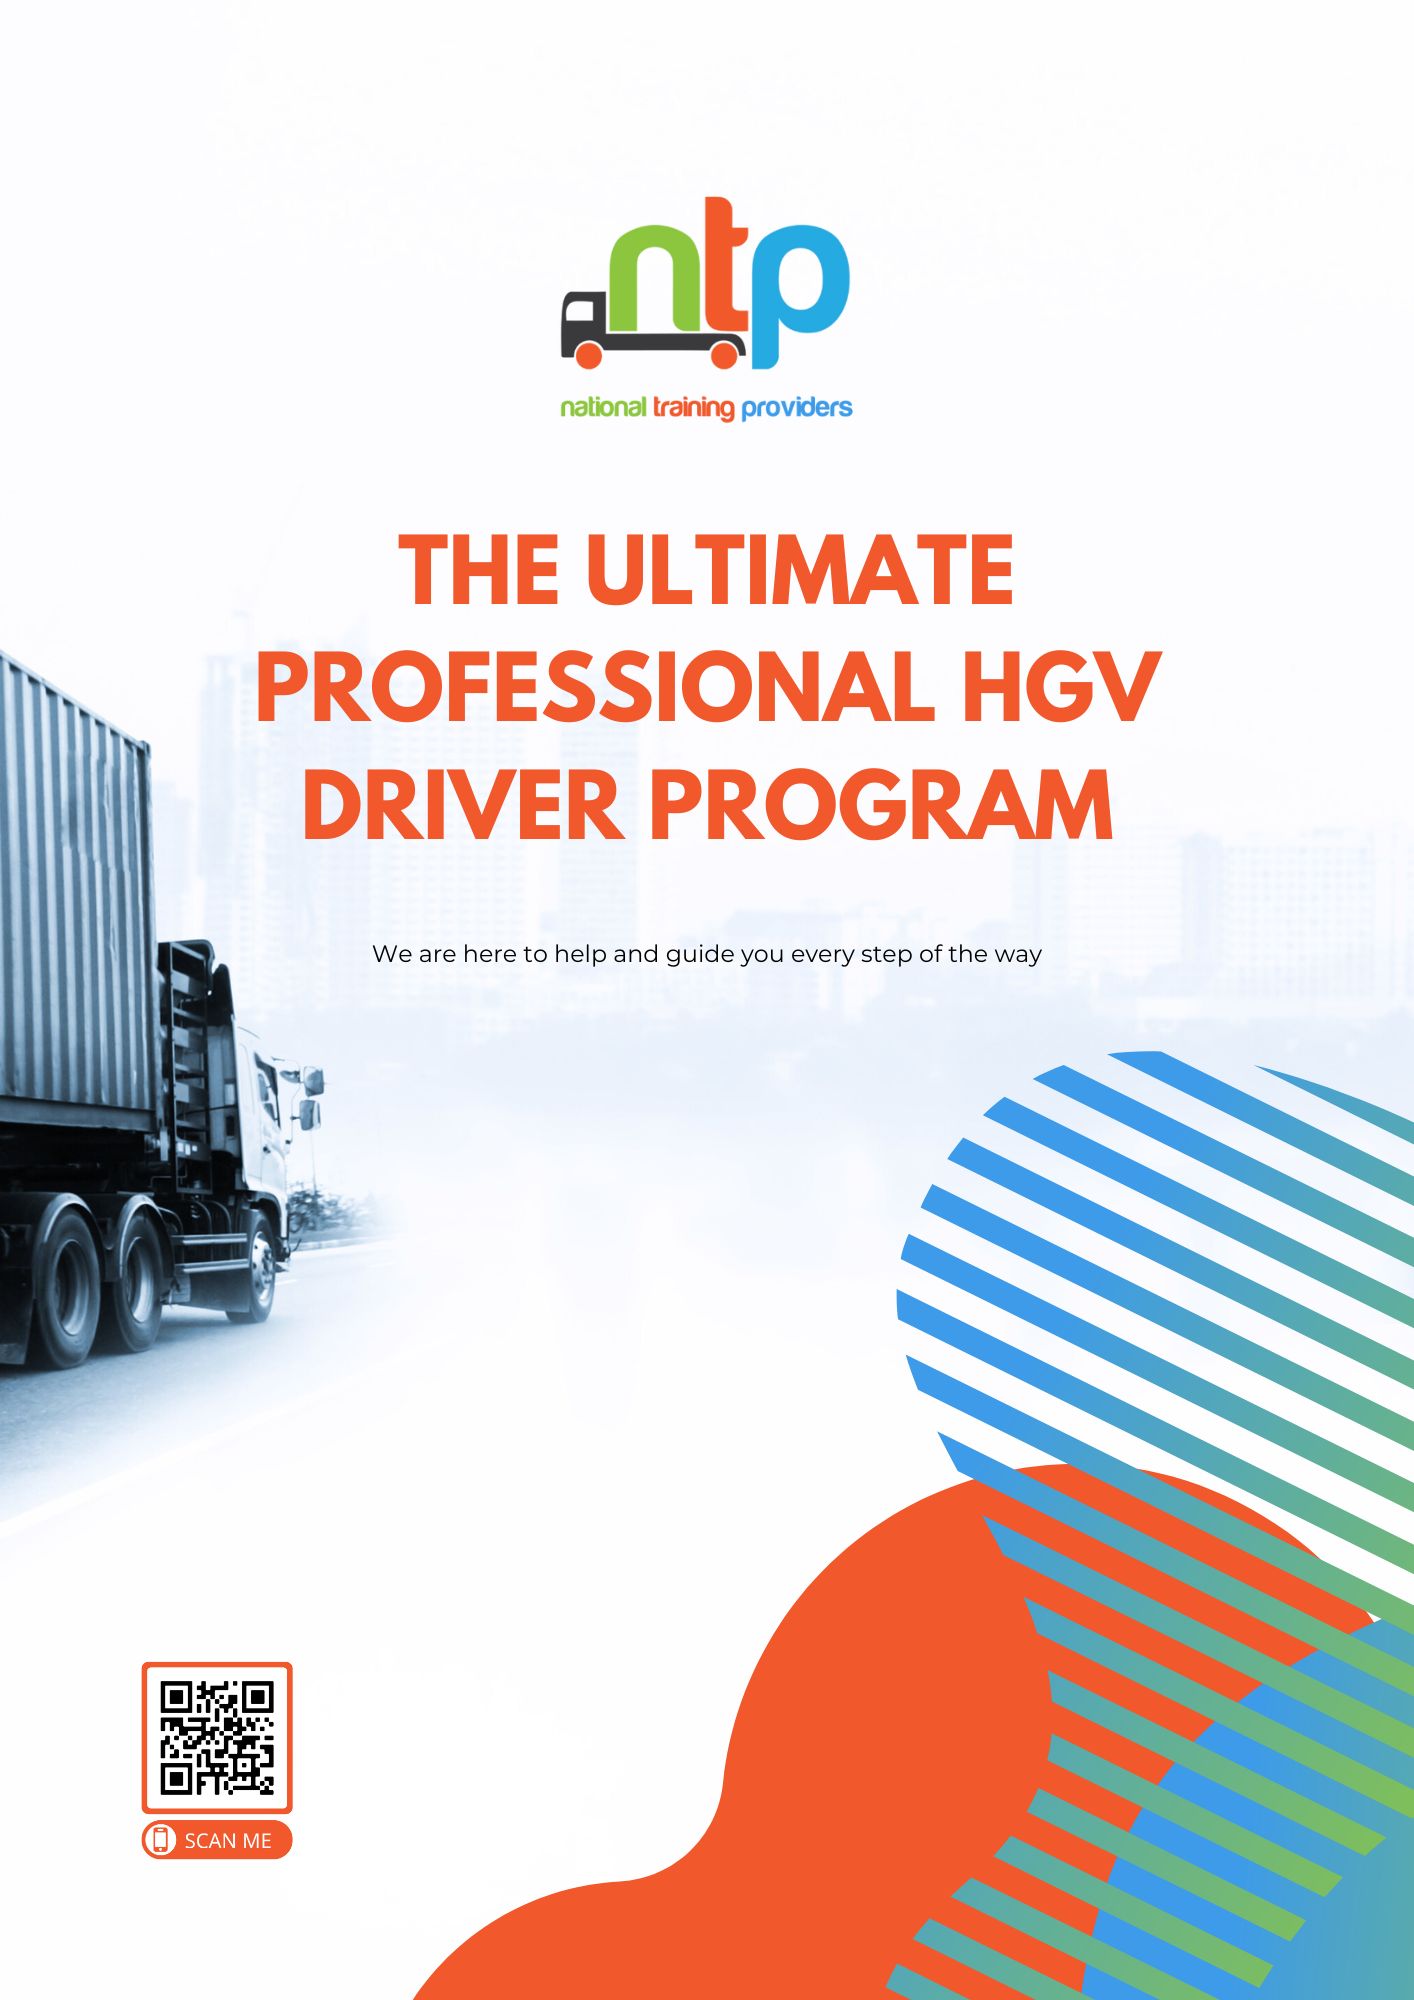 Request the ultimate professional HGV driver course information.